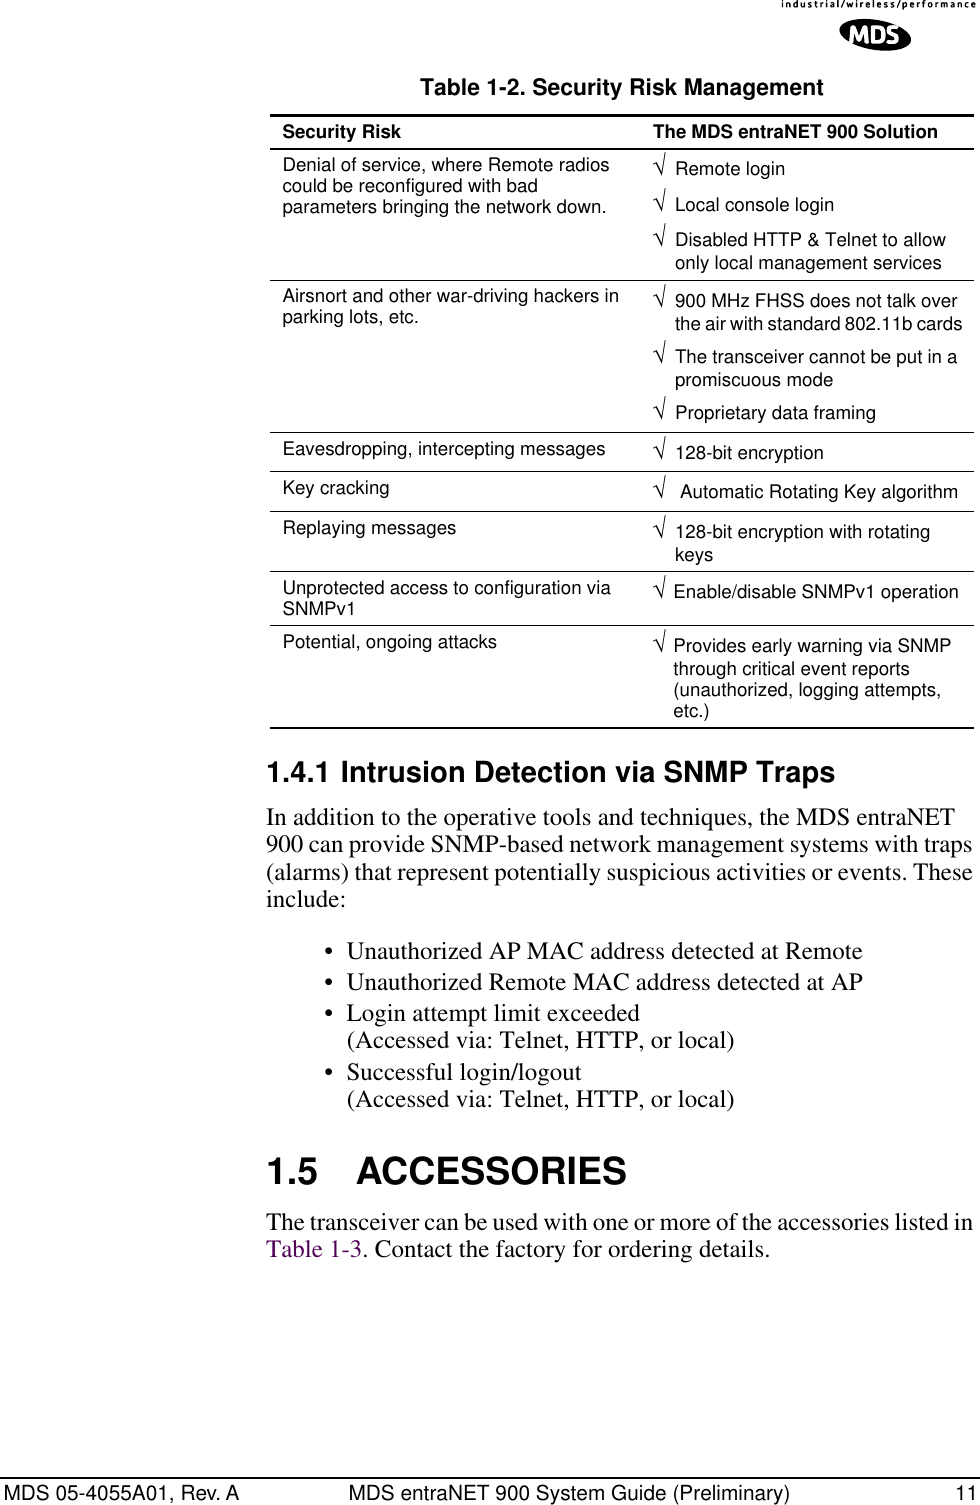 MDS 05-4055A01, Rev. A MDS entraNET 900 System Guide (Preliminary) 111.4.1 Intrusion Detection via SNMP TrapsIn addition to the operative tools and techniques, the MDS entraNET 900 can provide SNMP-based network management systems with traps (alarms) that represent potentially suspicious activities or events. These include:• Unauthorized AP MAC address detected at Remote• Unauthorized Remote MAC address detected at AP• Login attempt limit exceeded (Accessed via: Telnet, HTTP, or local)• Successful login/logout (Accessed via: Telnet, HTTP, or local)1.5 ACCESSORIESThe transceiver can be used with one or more of the accessories listed in Table 1-3. Contact the factory for ordering details.Denial of service, where Remote radios could be reconfigured with bad parameters bringing the network down.√Remote login√Local console login√Disabled HTTP &amp; Telnet to allow only local management servicesAirsnort and other war-driving hackers in parking lots, etc. √900 MHz FHSS does not talk over the air with standard 802.11b cards√The transceiver cannot be put in a promiscuous mode√Proprietary data framingEavesdropping, intercepting messages √128-bit encryptionKey cracking √ Automatic Rotating Key algorithmReplaying messages √128-bit encryption with rotating keysUnprotected access to configuration via SNMPv1 √Enable/disable SNMPv1 operationPotential, ongoing attacks √Provides early warning via SNMP through critical event reports (unauthorized, logging attempts, etc.)Table 1-2. Security Risk ManagementSecurity Risk The MDS entraNET 900 Solution